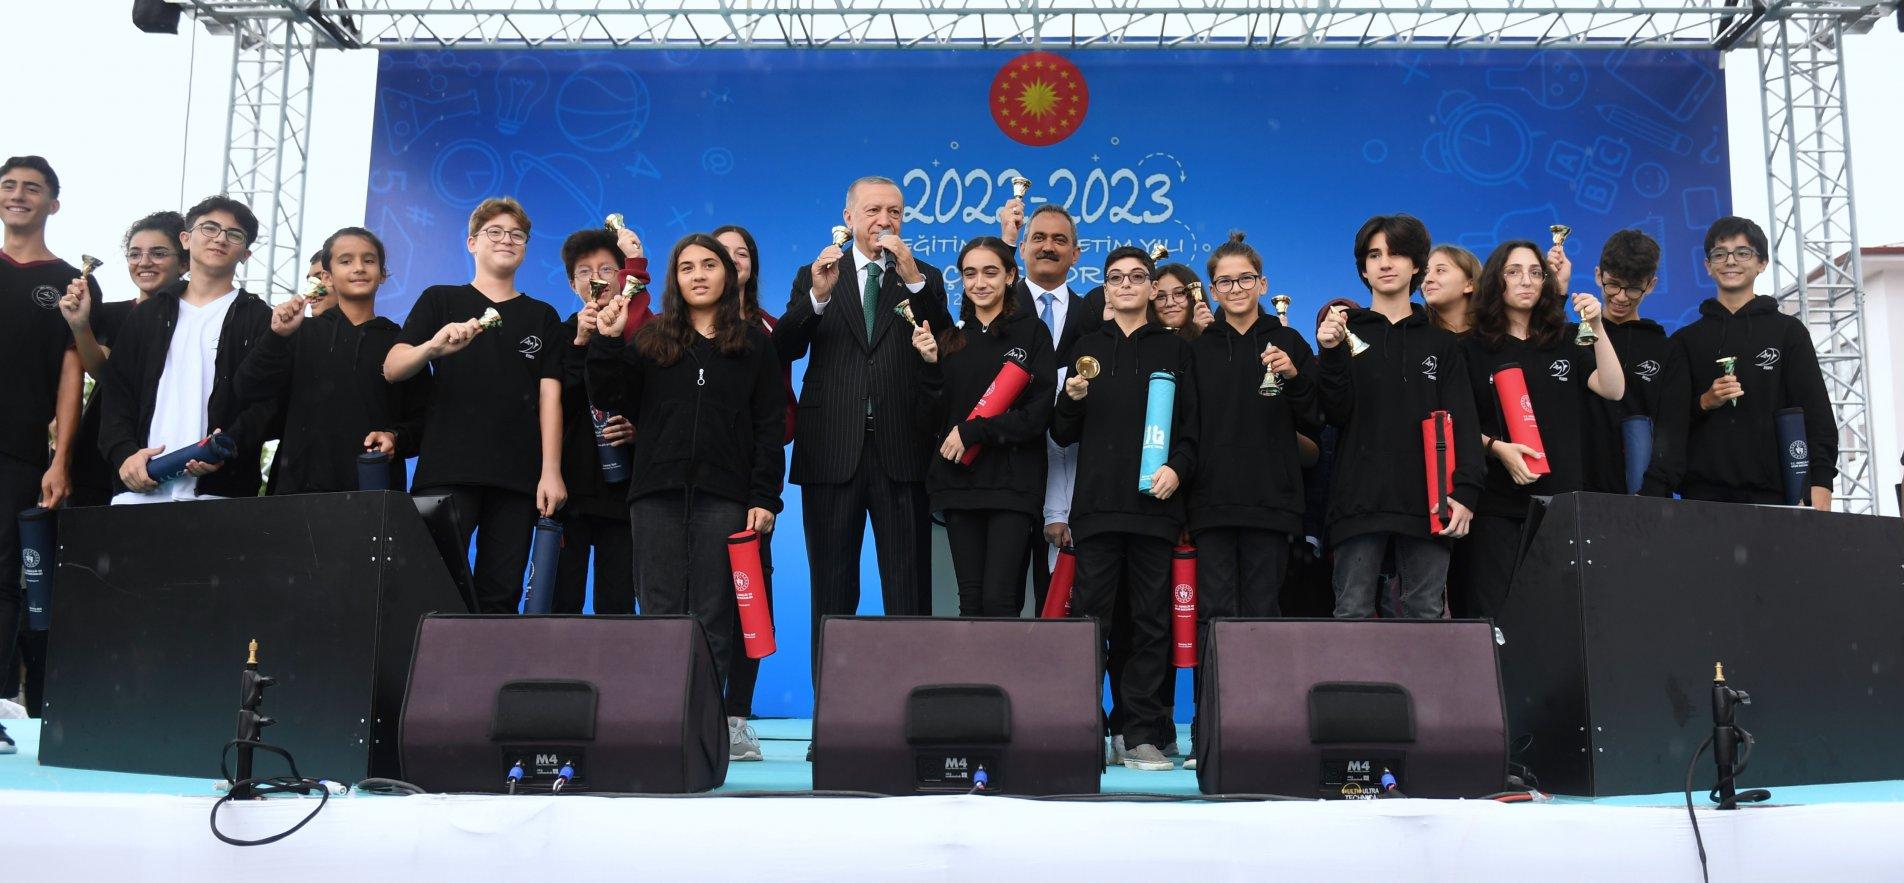 PRESIDENT ERDOĞAN AND MINISTER ÖZER RANG THE FIRST SCHOOL BELL OF THE NEW SCHOOL YEAR